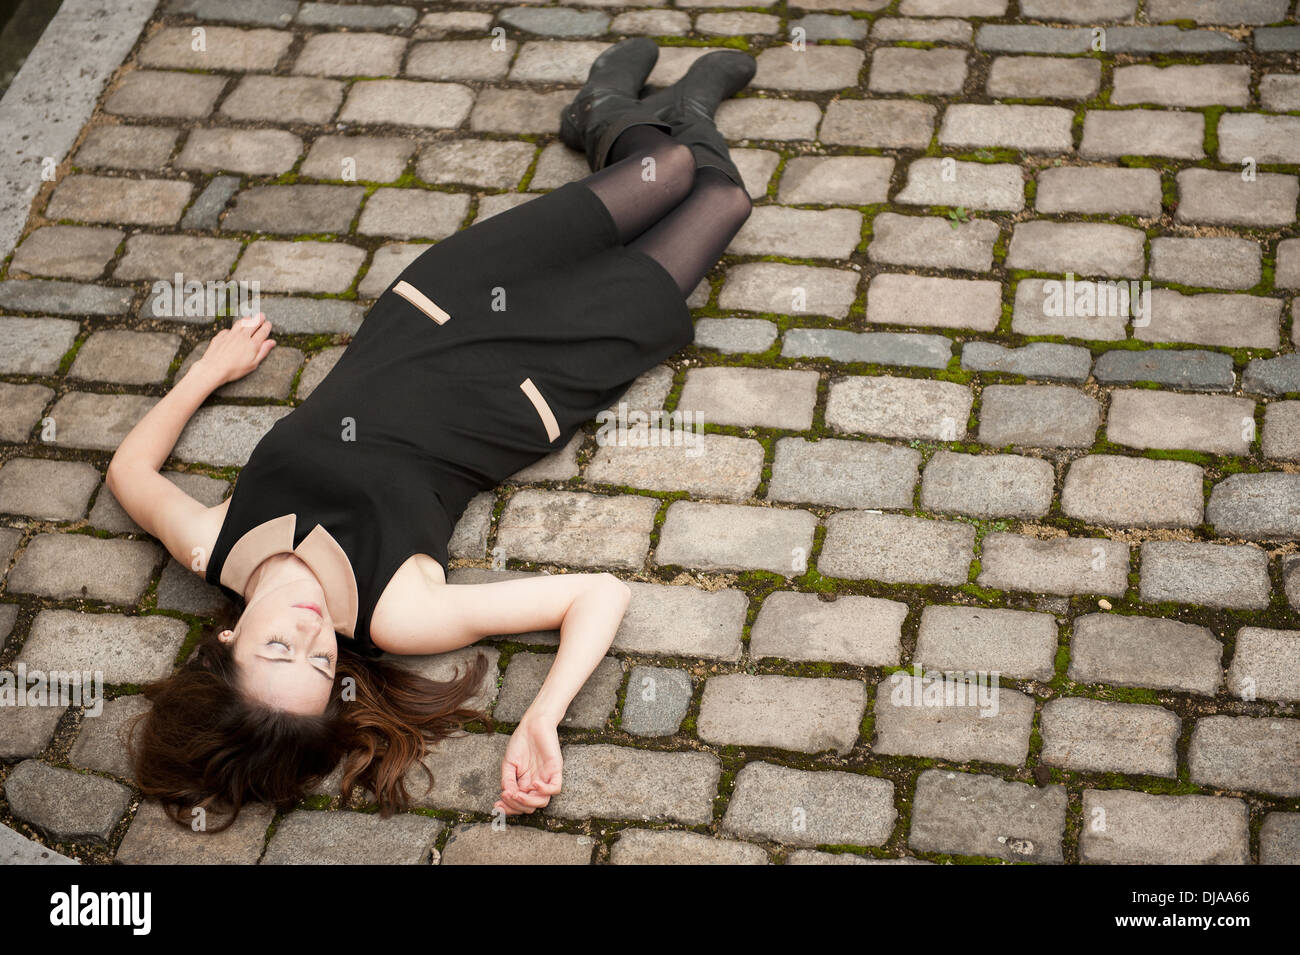 Elevated view of a woman wearing a black dress and lying down (dead?) on a cobbled road. Stock Photo